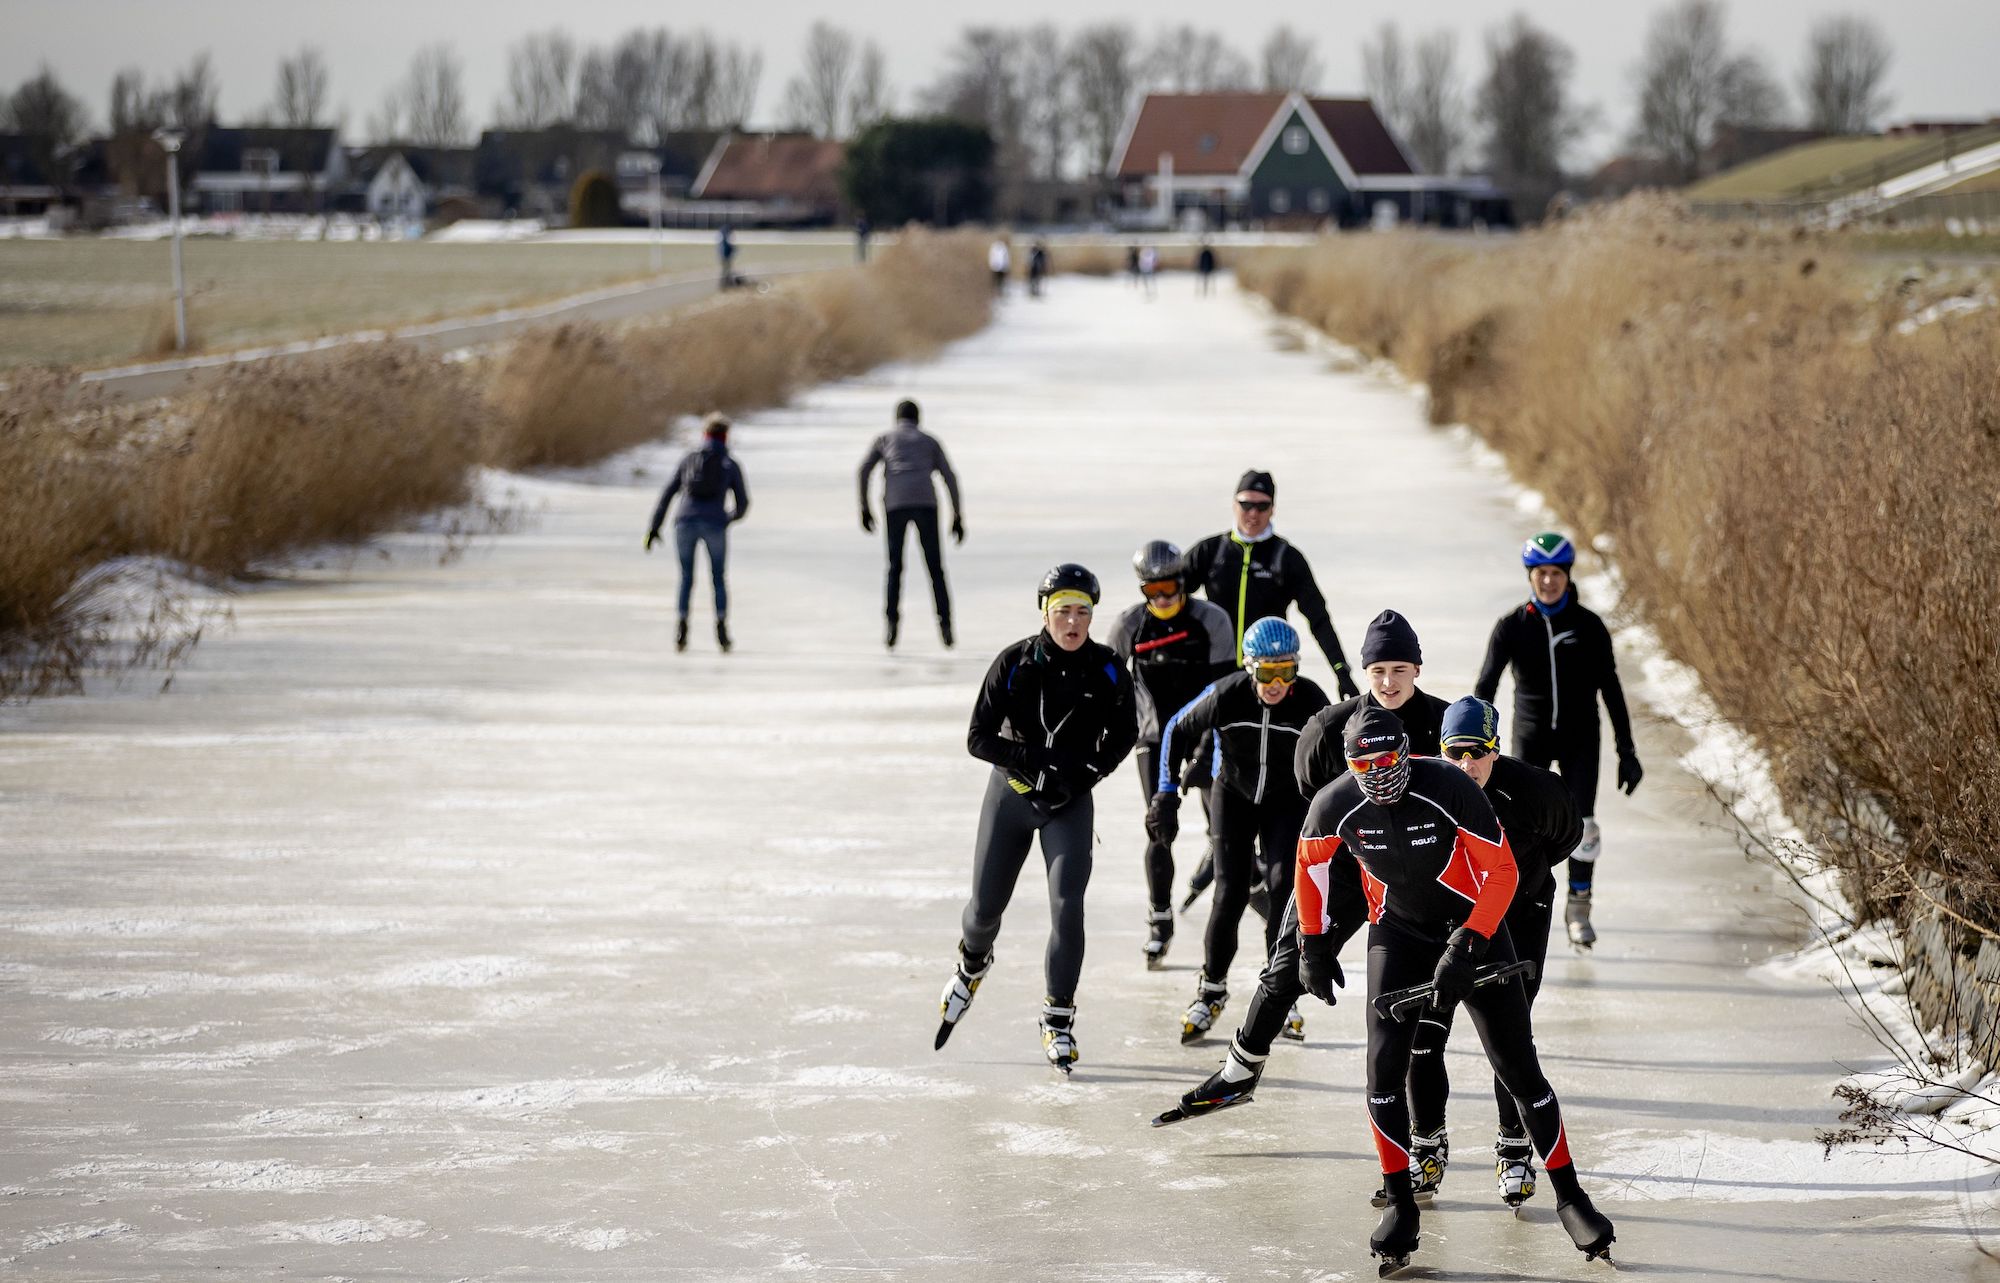 Dutch skater Henk Angenent (C/red/black) is followed by others as he glides across ice on a canal at Hindeloopen on February 14, 2021, as he attempts the 'Elfstedentocht' in the Netherlands' province of Friesland. - Angenent a farmer, who was winner of the last edition of the 'Elfstedentocht' in 1997, which is an organised 200-kilometre skating tour along the 11 Frisian towns and has been adapted to comly with restrictions as part of the ongoing coronavirus (Covid-19) pandemic. (Photo by ROBIN VAN LONKHUIJSEN / ANP / AFP) / Netherlands OUT (Photo by ROBIN VAN LONKHUIJSEN/ANP/AFP via Getty Images)